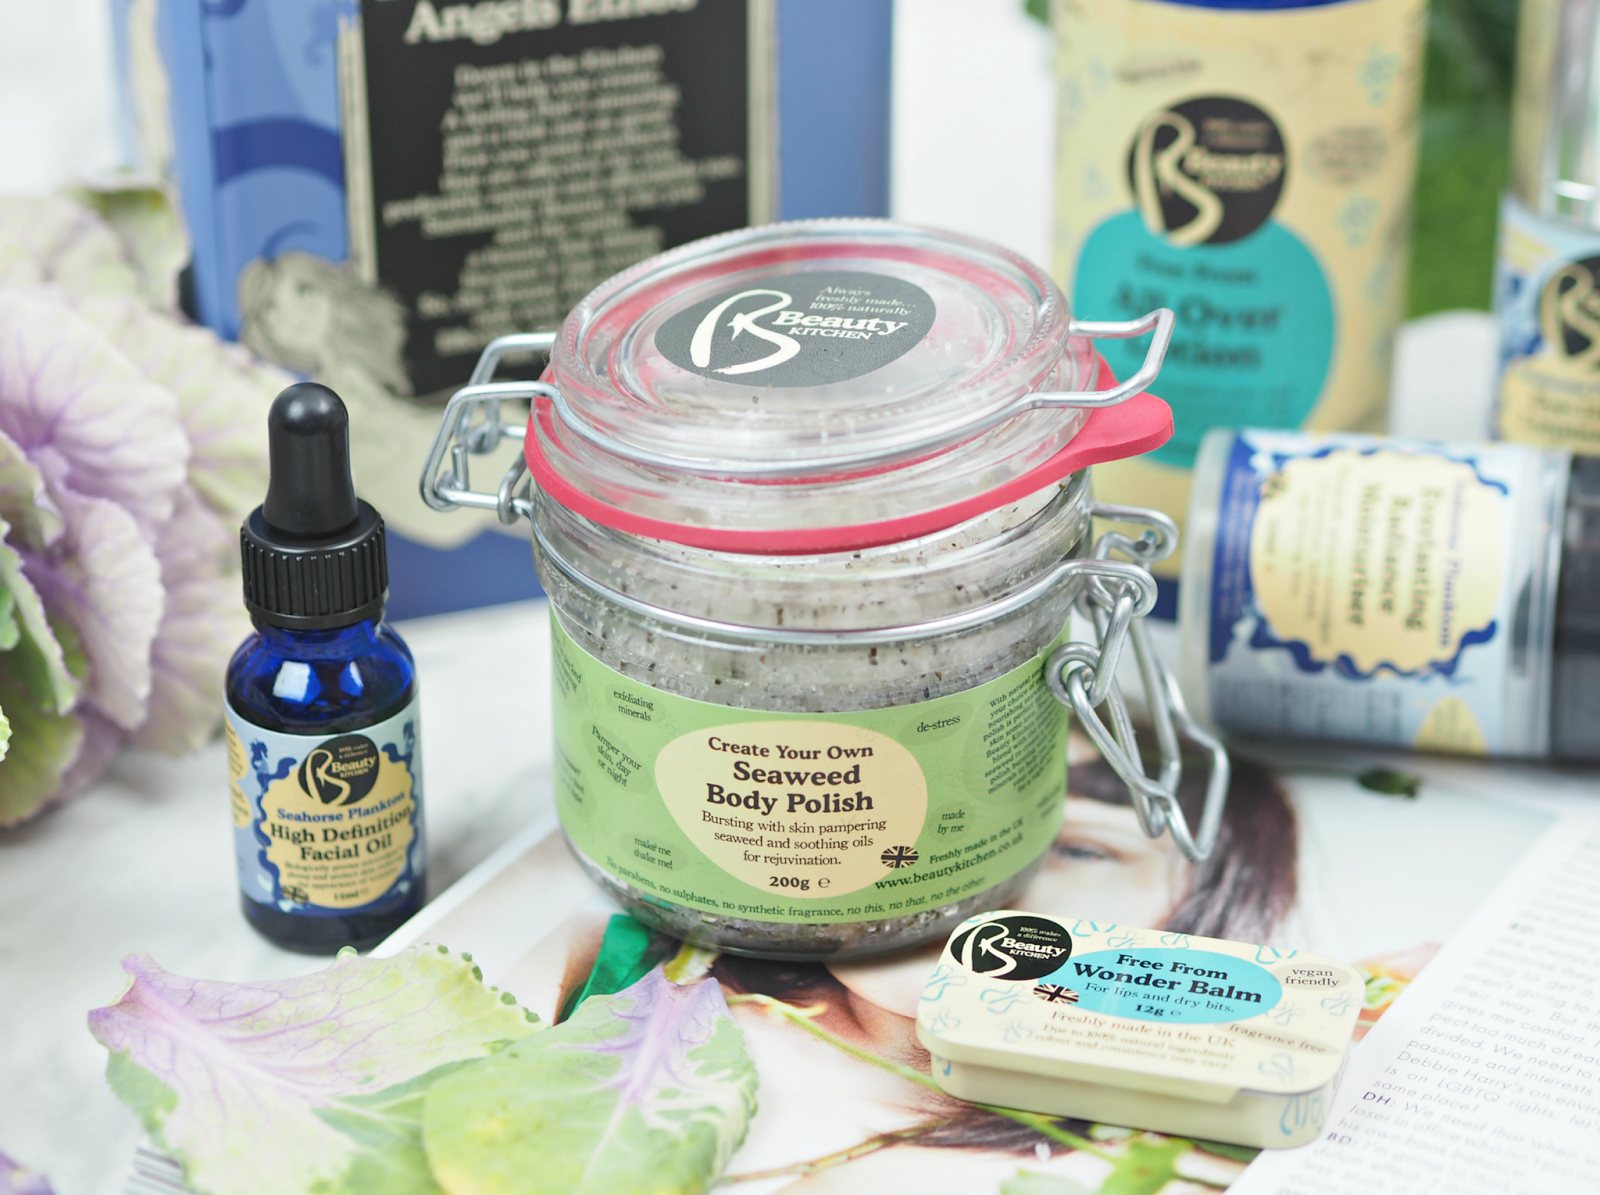 Create Your Own Bespoke Beauty Products With The Beauty Kitchen: Affordable, Effective, Natural & Really Quite Fun!